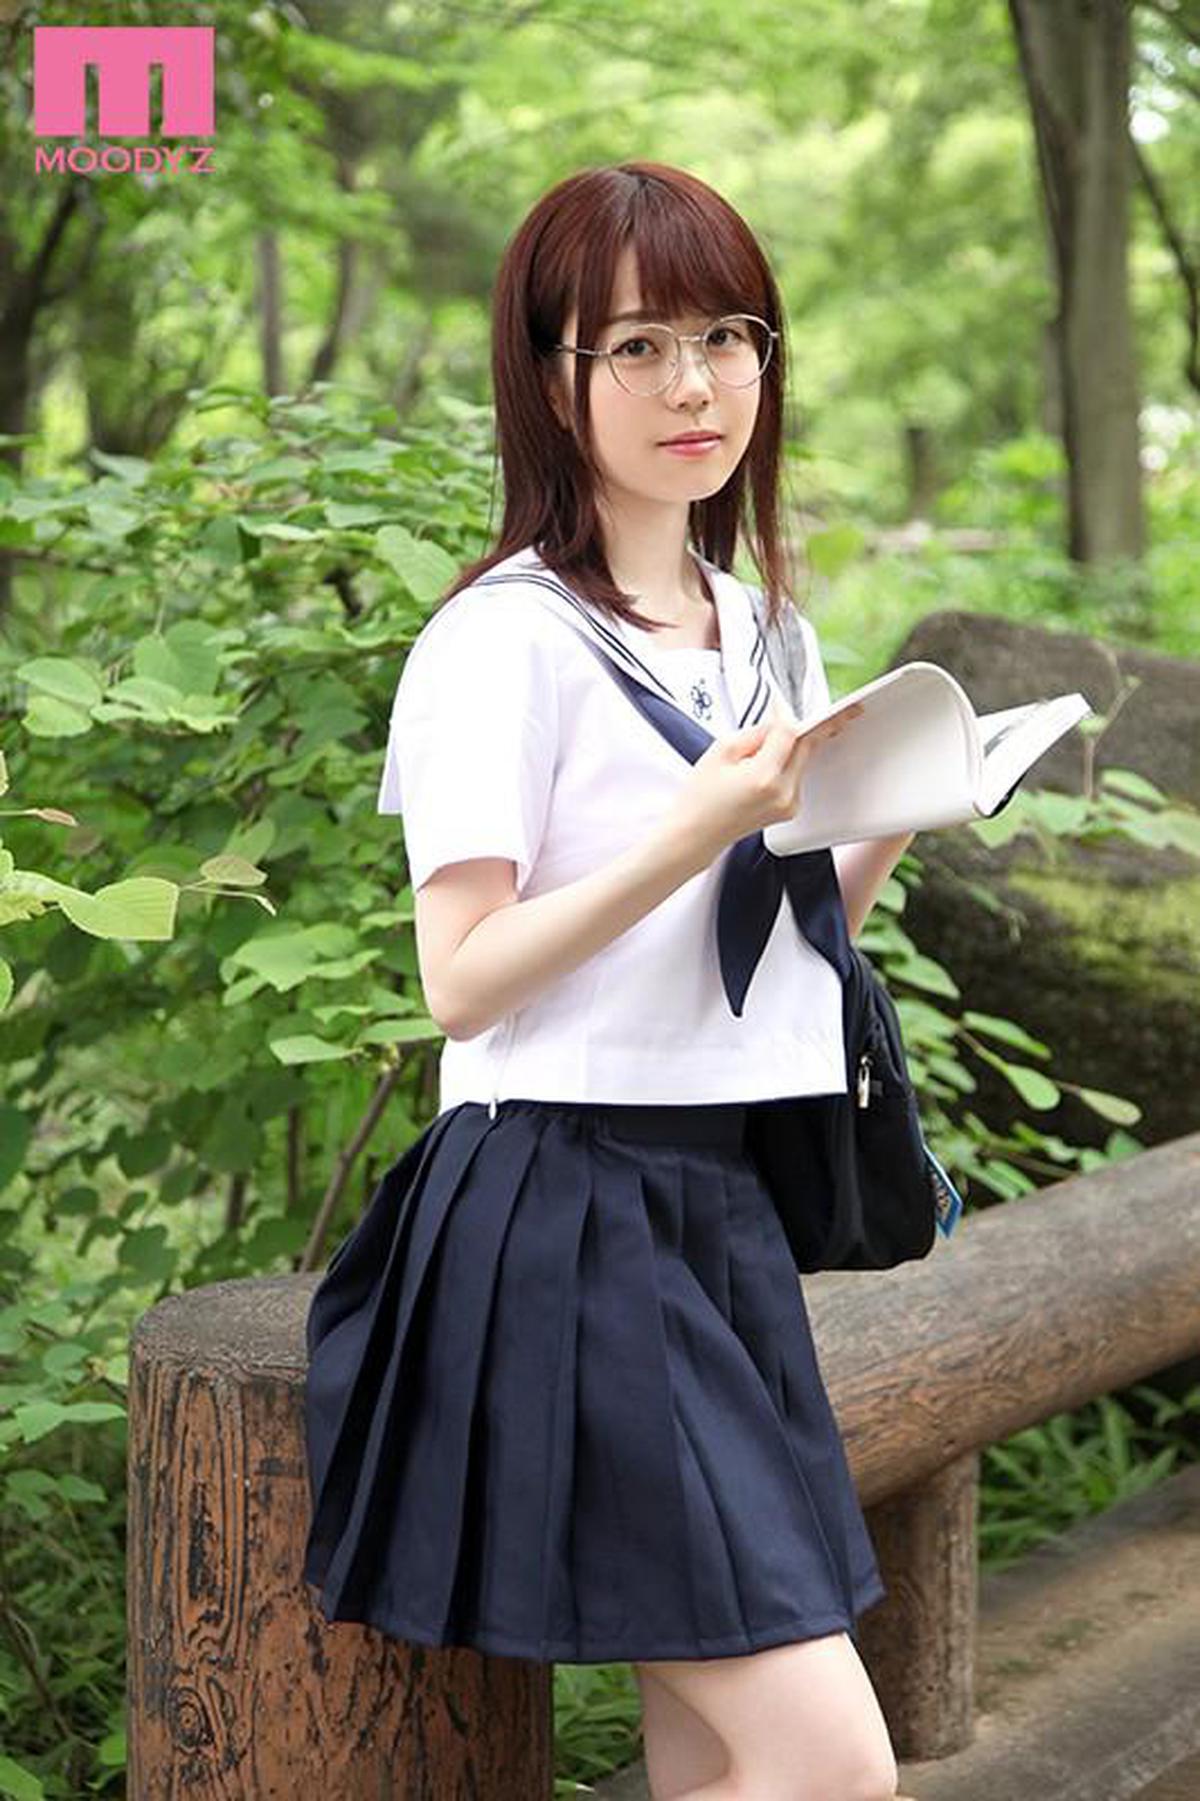 6000Kbps FHD MIDE-690 First love. Sakura Miura, a literary girl whose uterus and heart have fallen because she was made into a squishy constitution by a terrific tech manipulative teacher